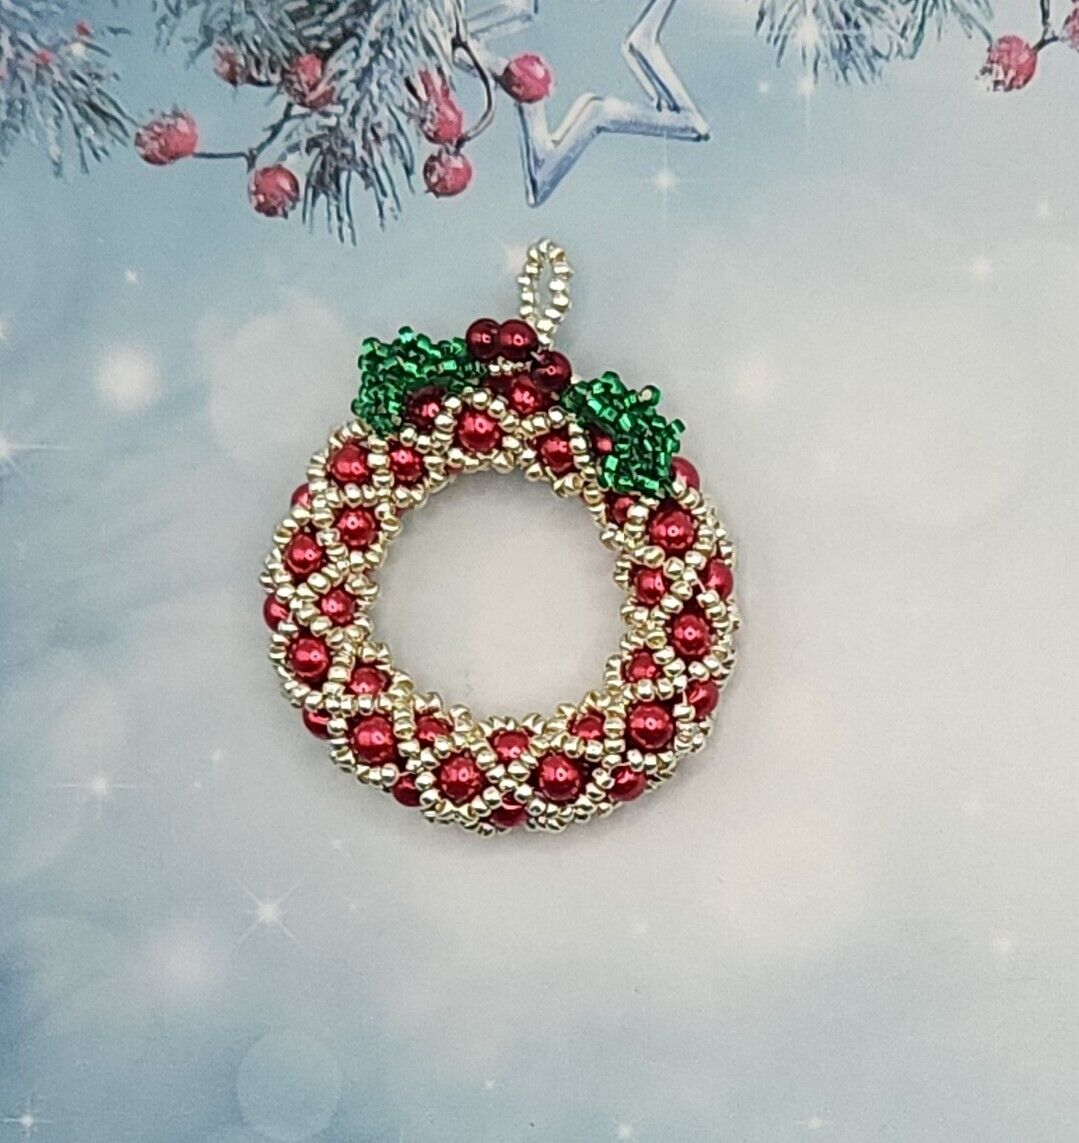 Mini Wreath 3D Christmas Ornament Handmade Beaded Red with Silver